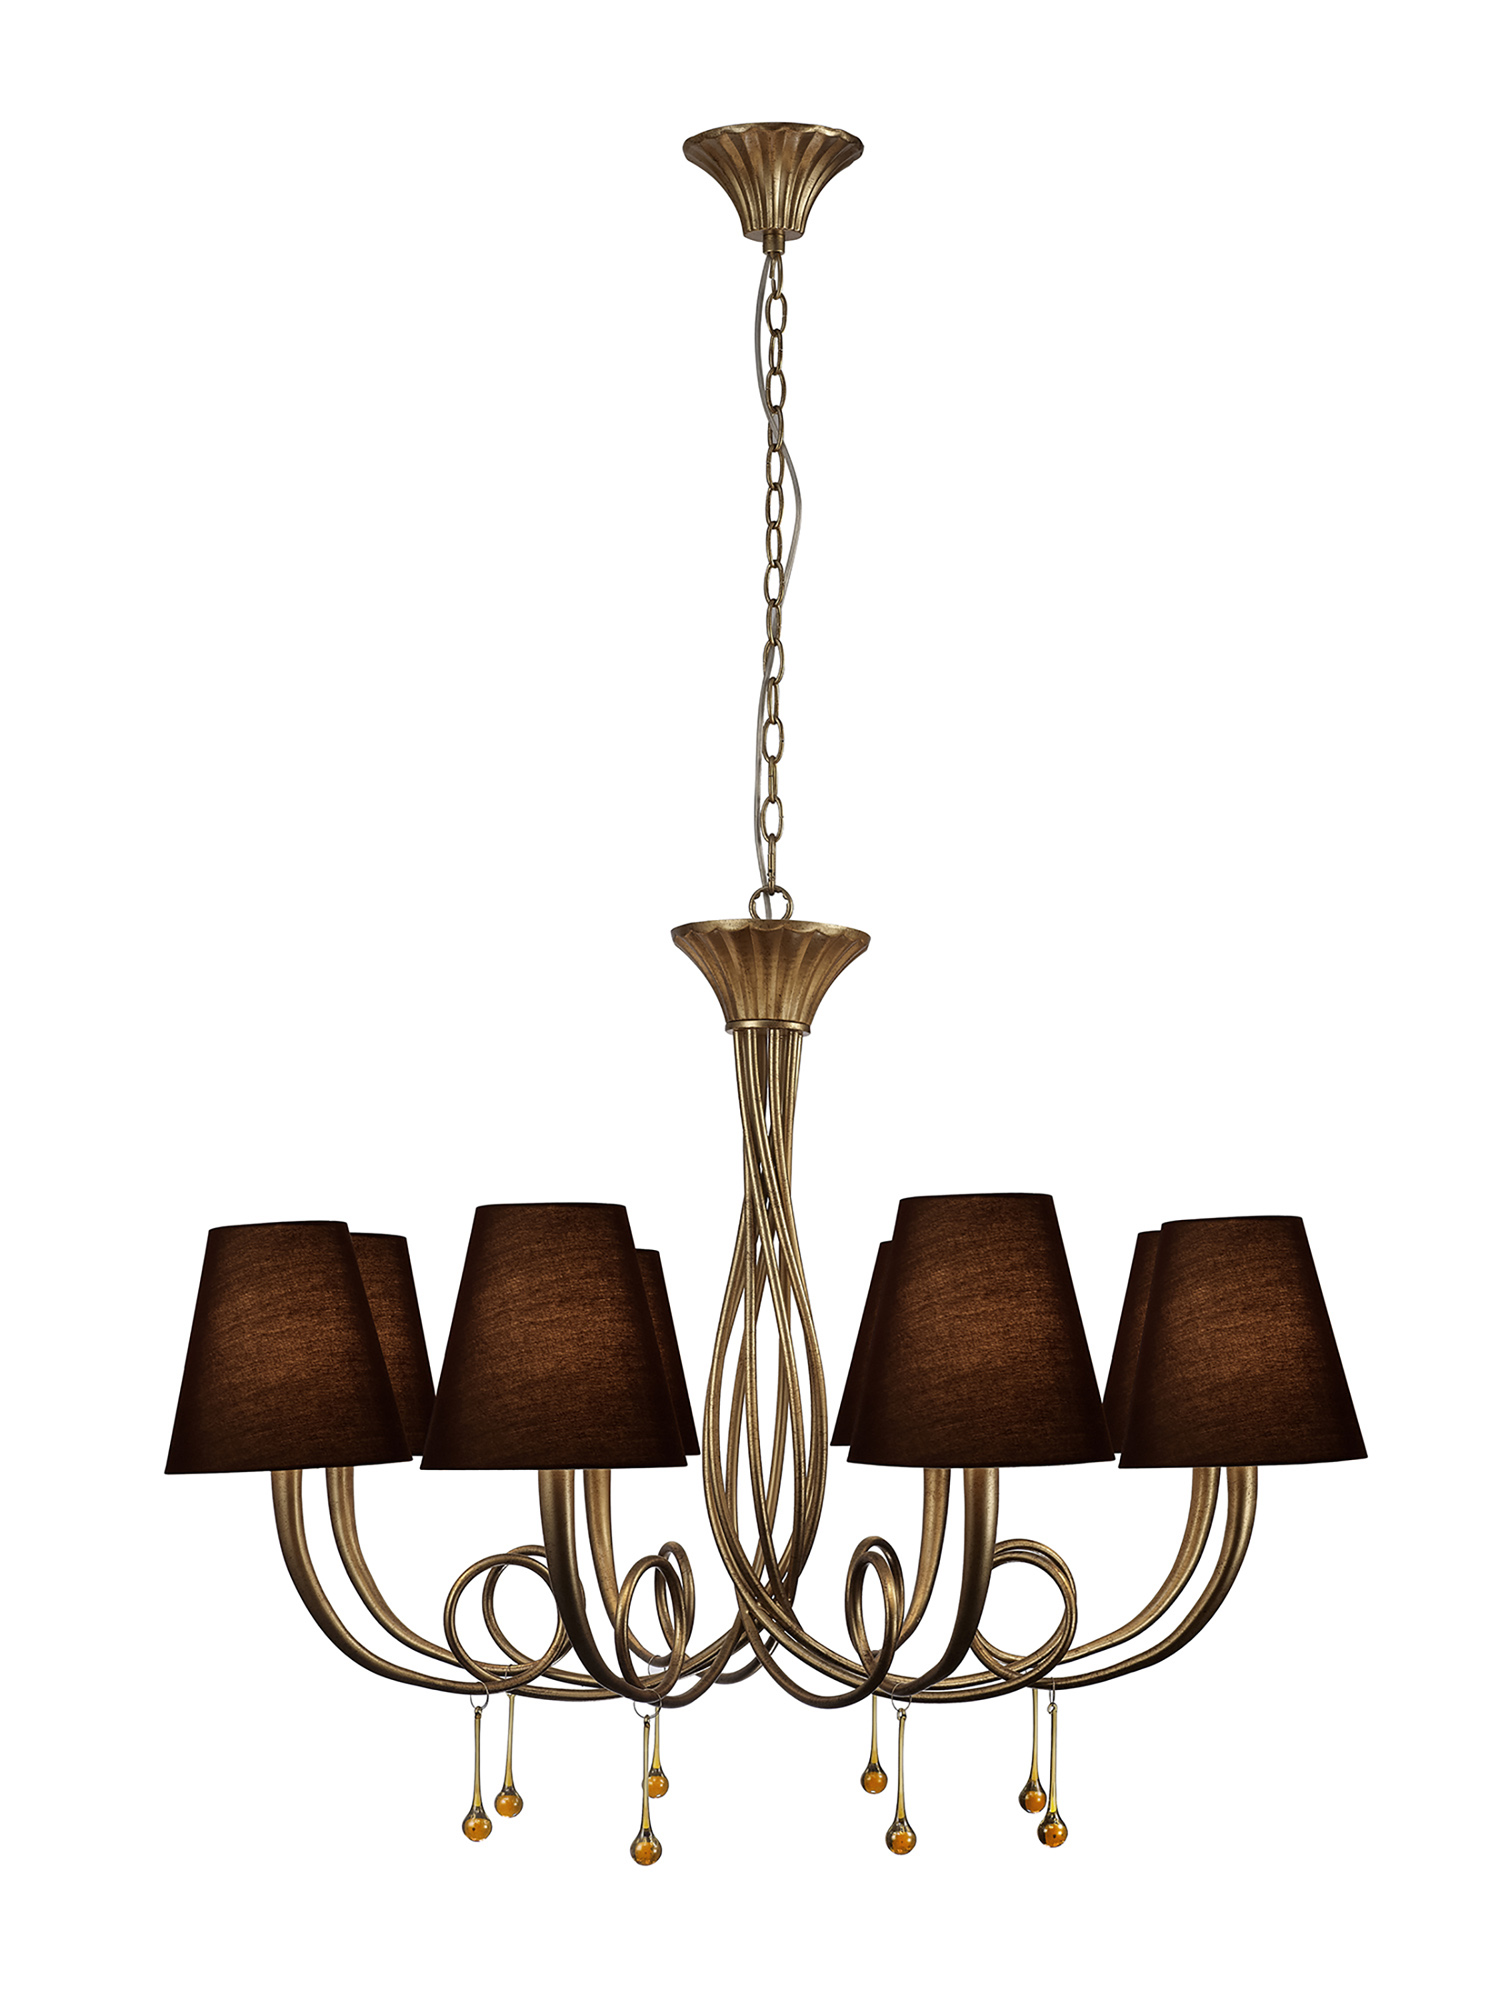 Paola Gold-Black Ceiling Lights Mantra Multi Arm Fittings